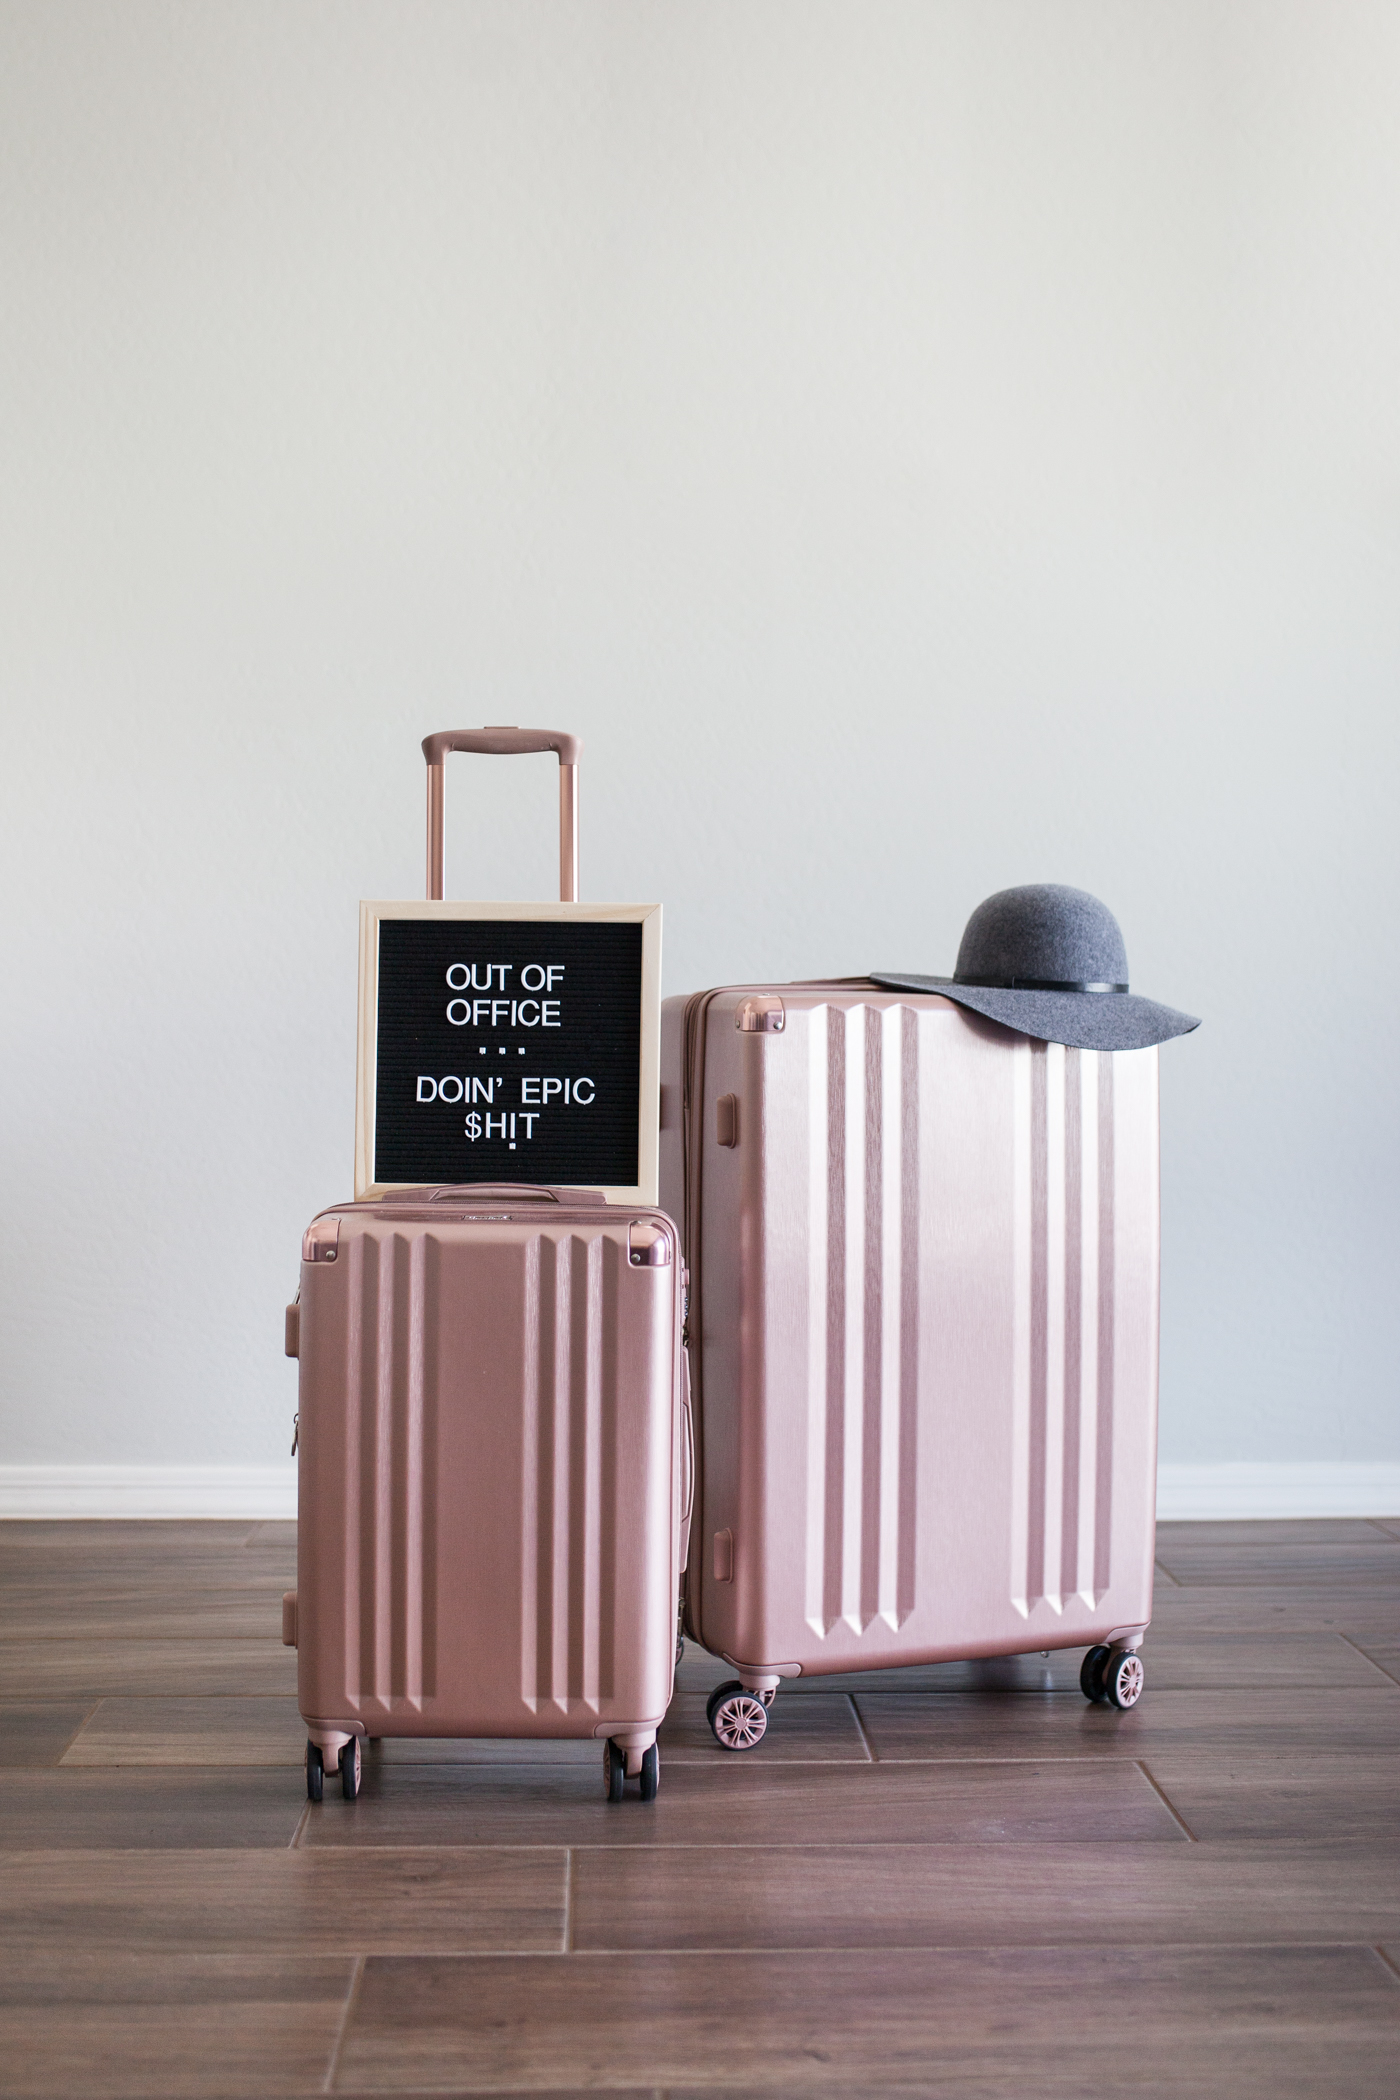 Calpak rose gold luggage set and felt letter board that says out of office: doin' epic shit